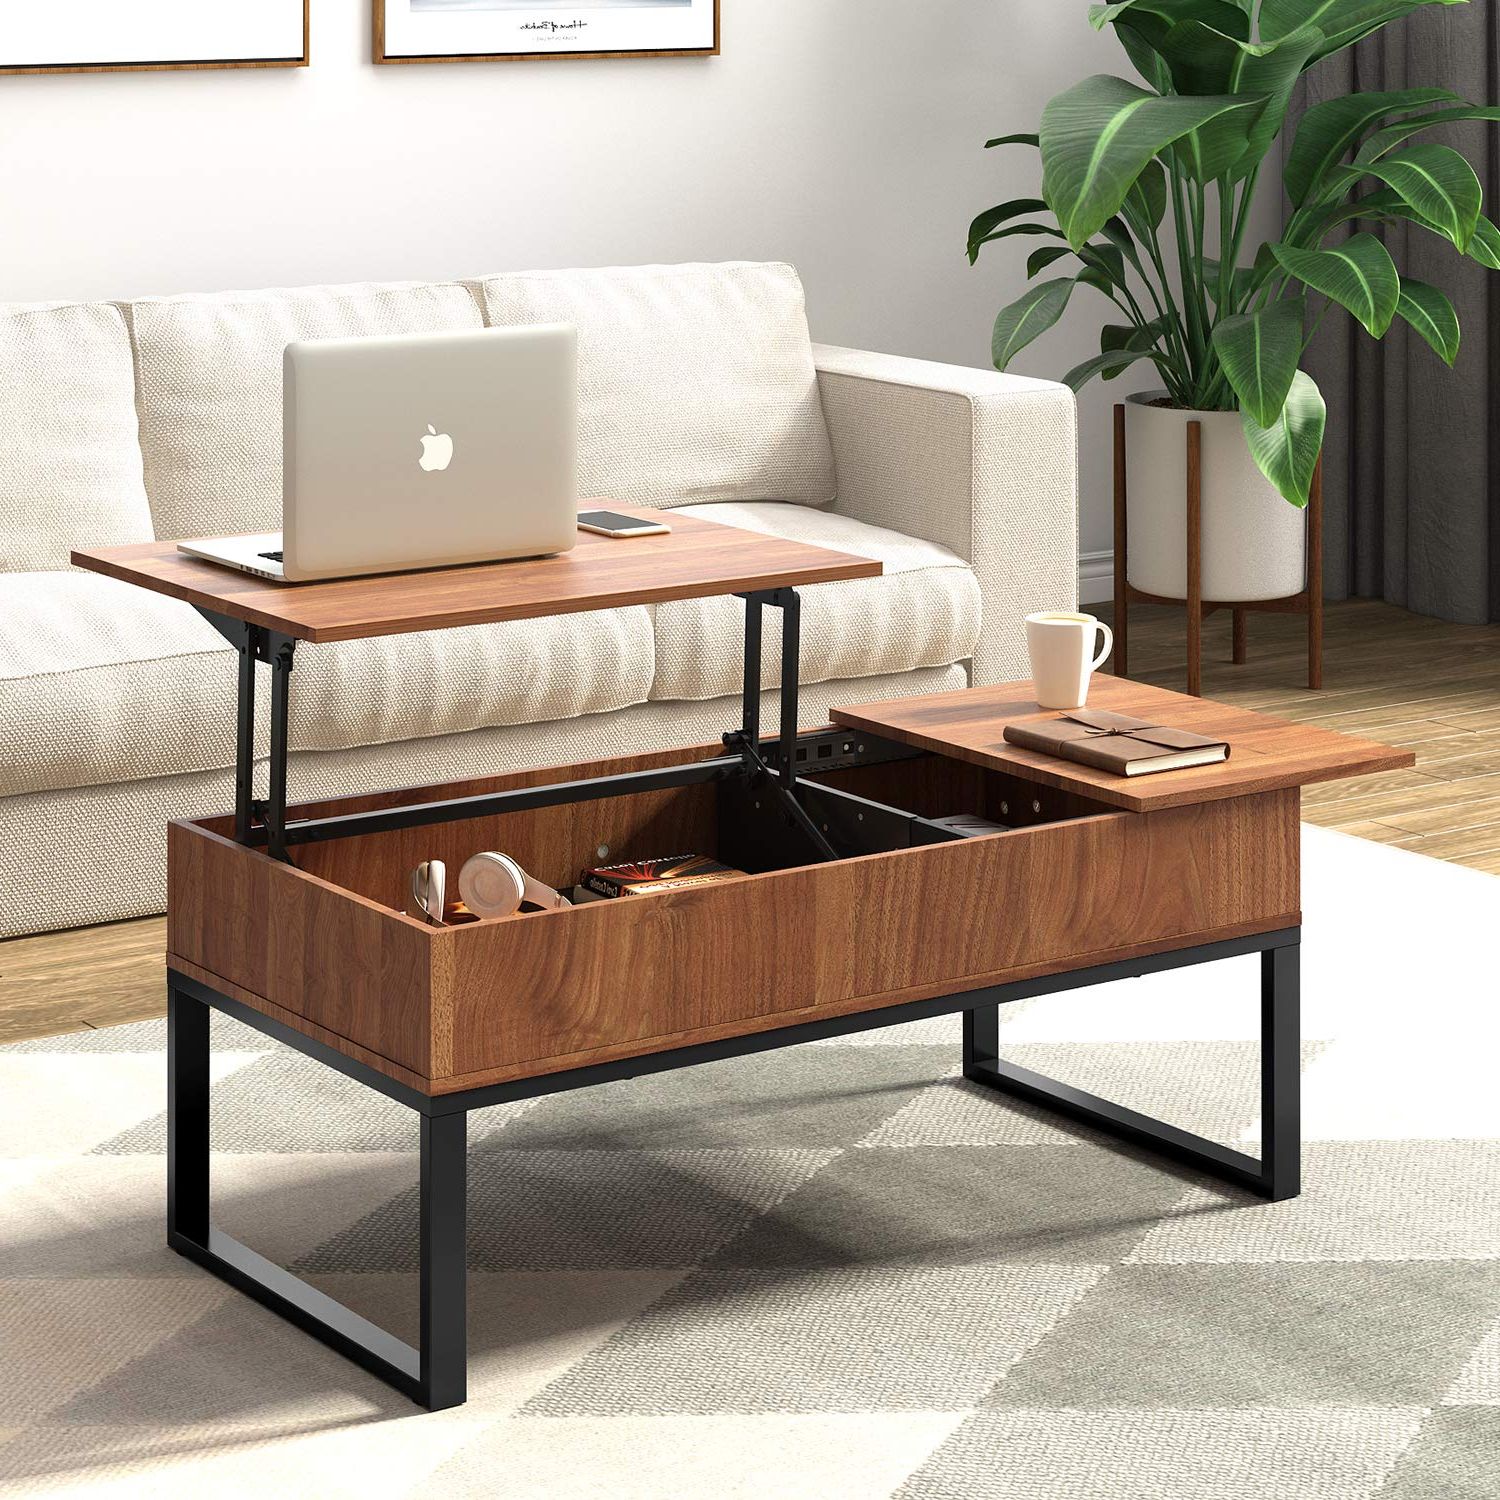 Lift Top Coffee Tables With Hidden Storage Compartments Regarding Famous Wlive Wood Coffee Table With Adjustable Lift Top Table, Metal Frame (Photo 8 of 15)